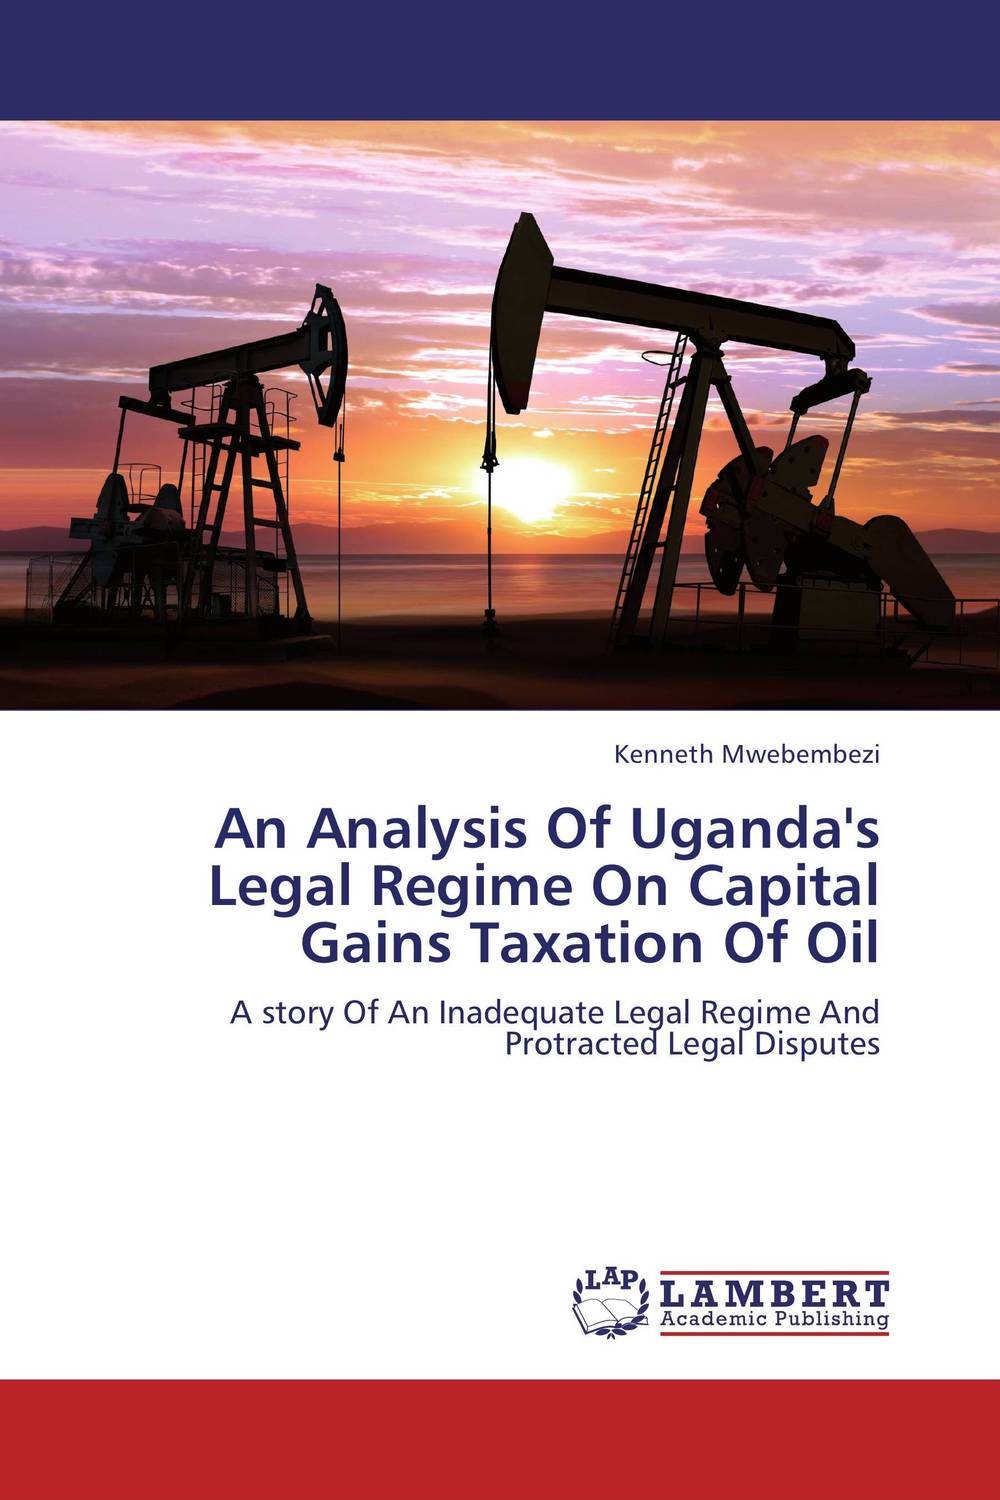 An Analysis Of Uganda`s Legal Regime On Capital Gains Taxation Of Oil